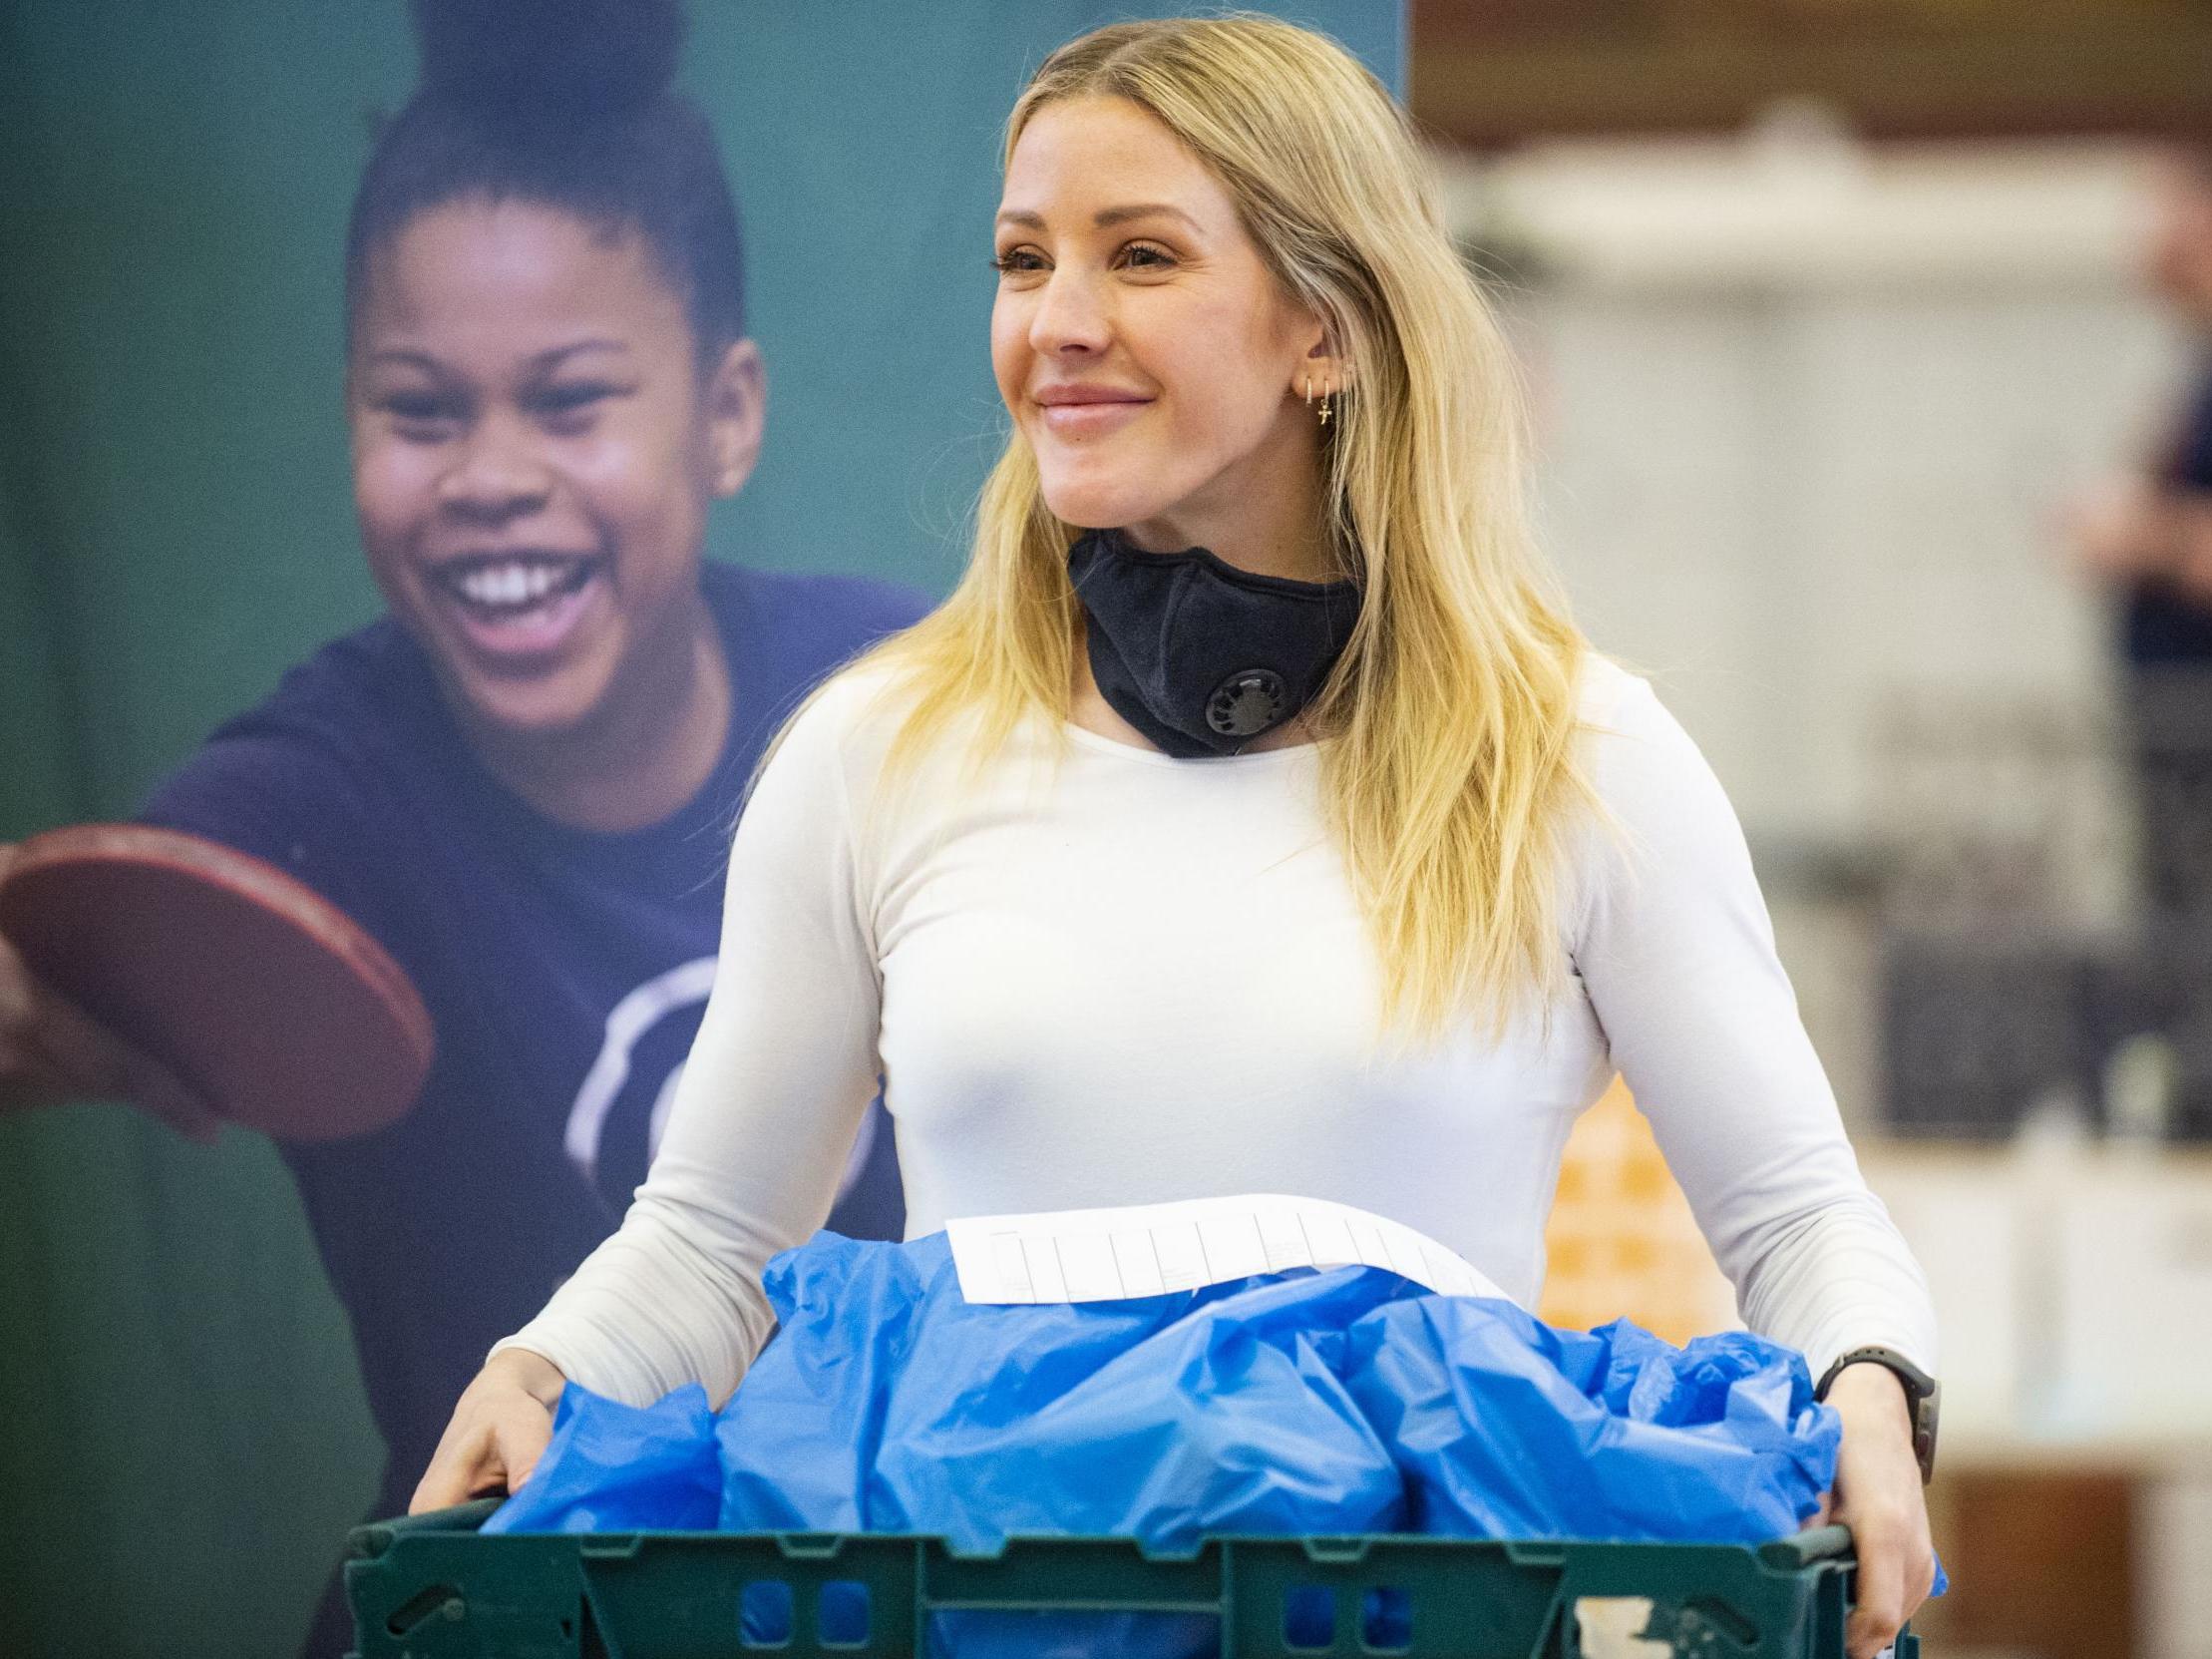 Ellie Goulding joined Felix Project volunteers to get food out to vulnerable people